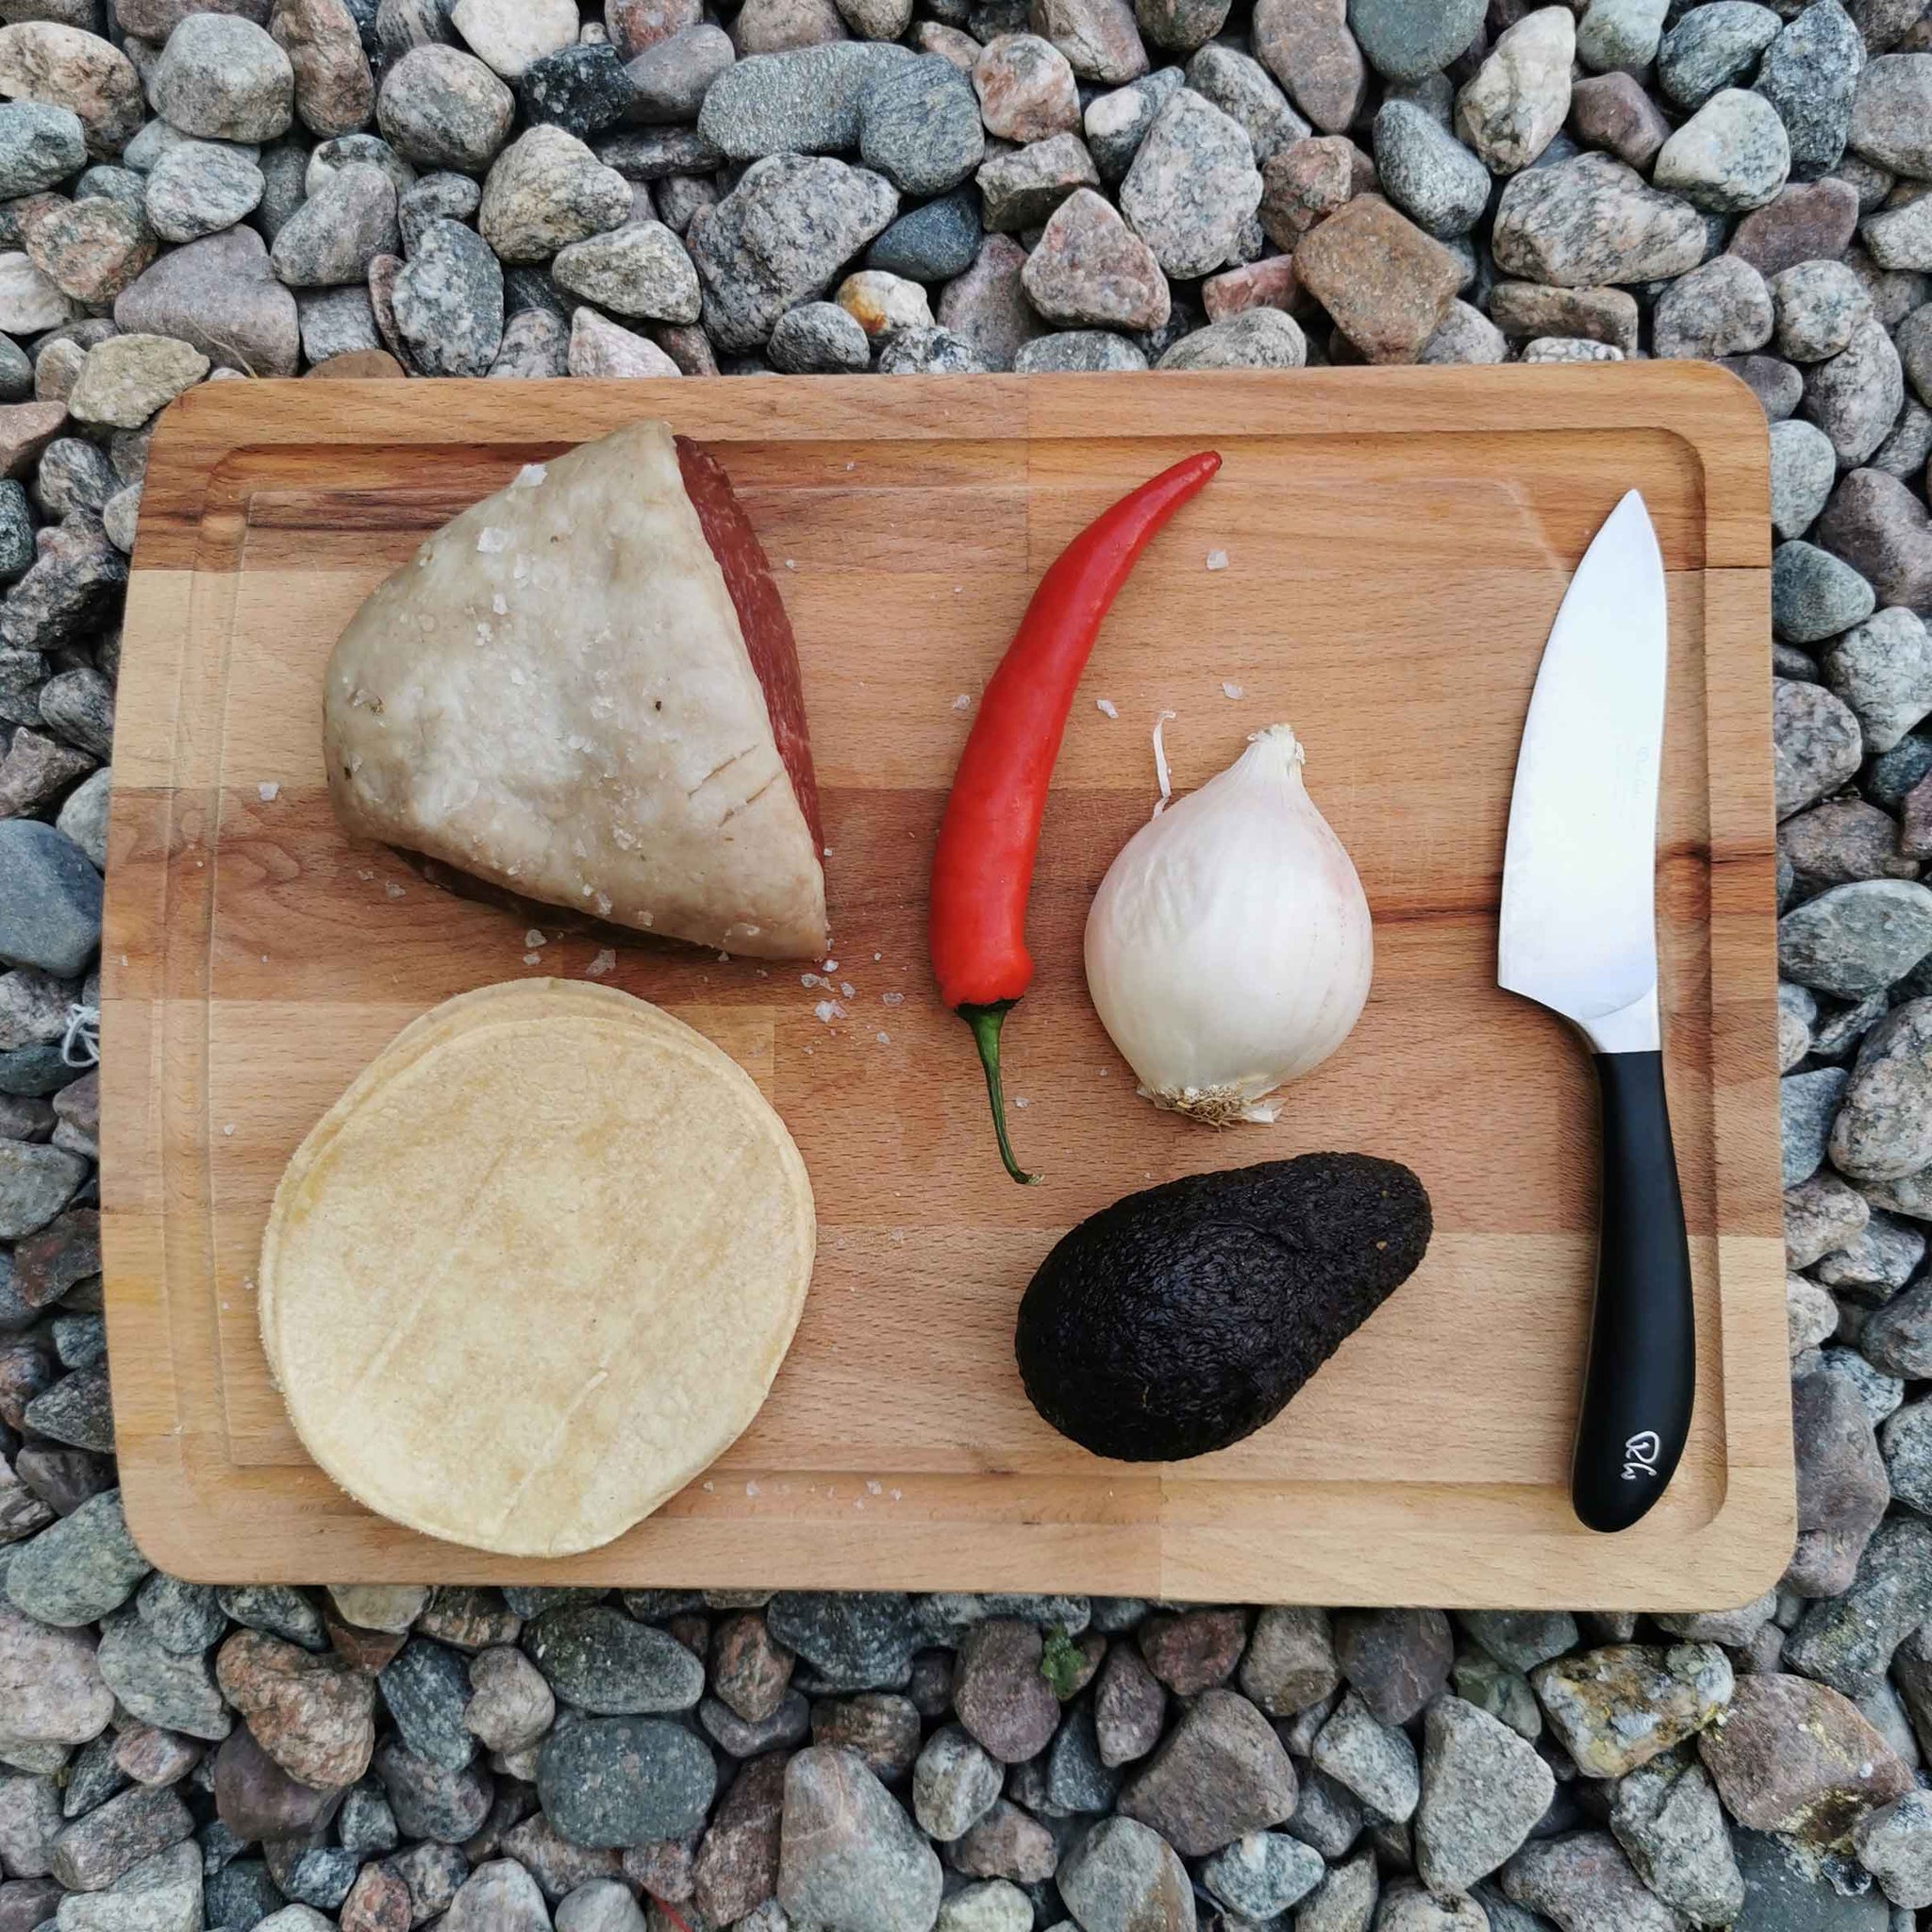 Picanha tacos ingredients